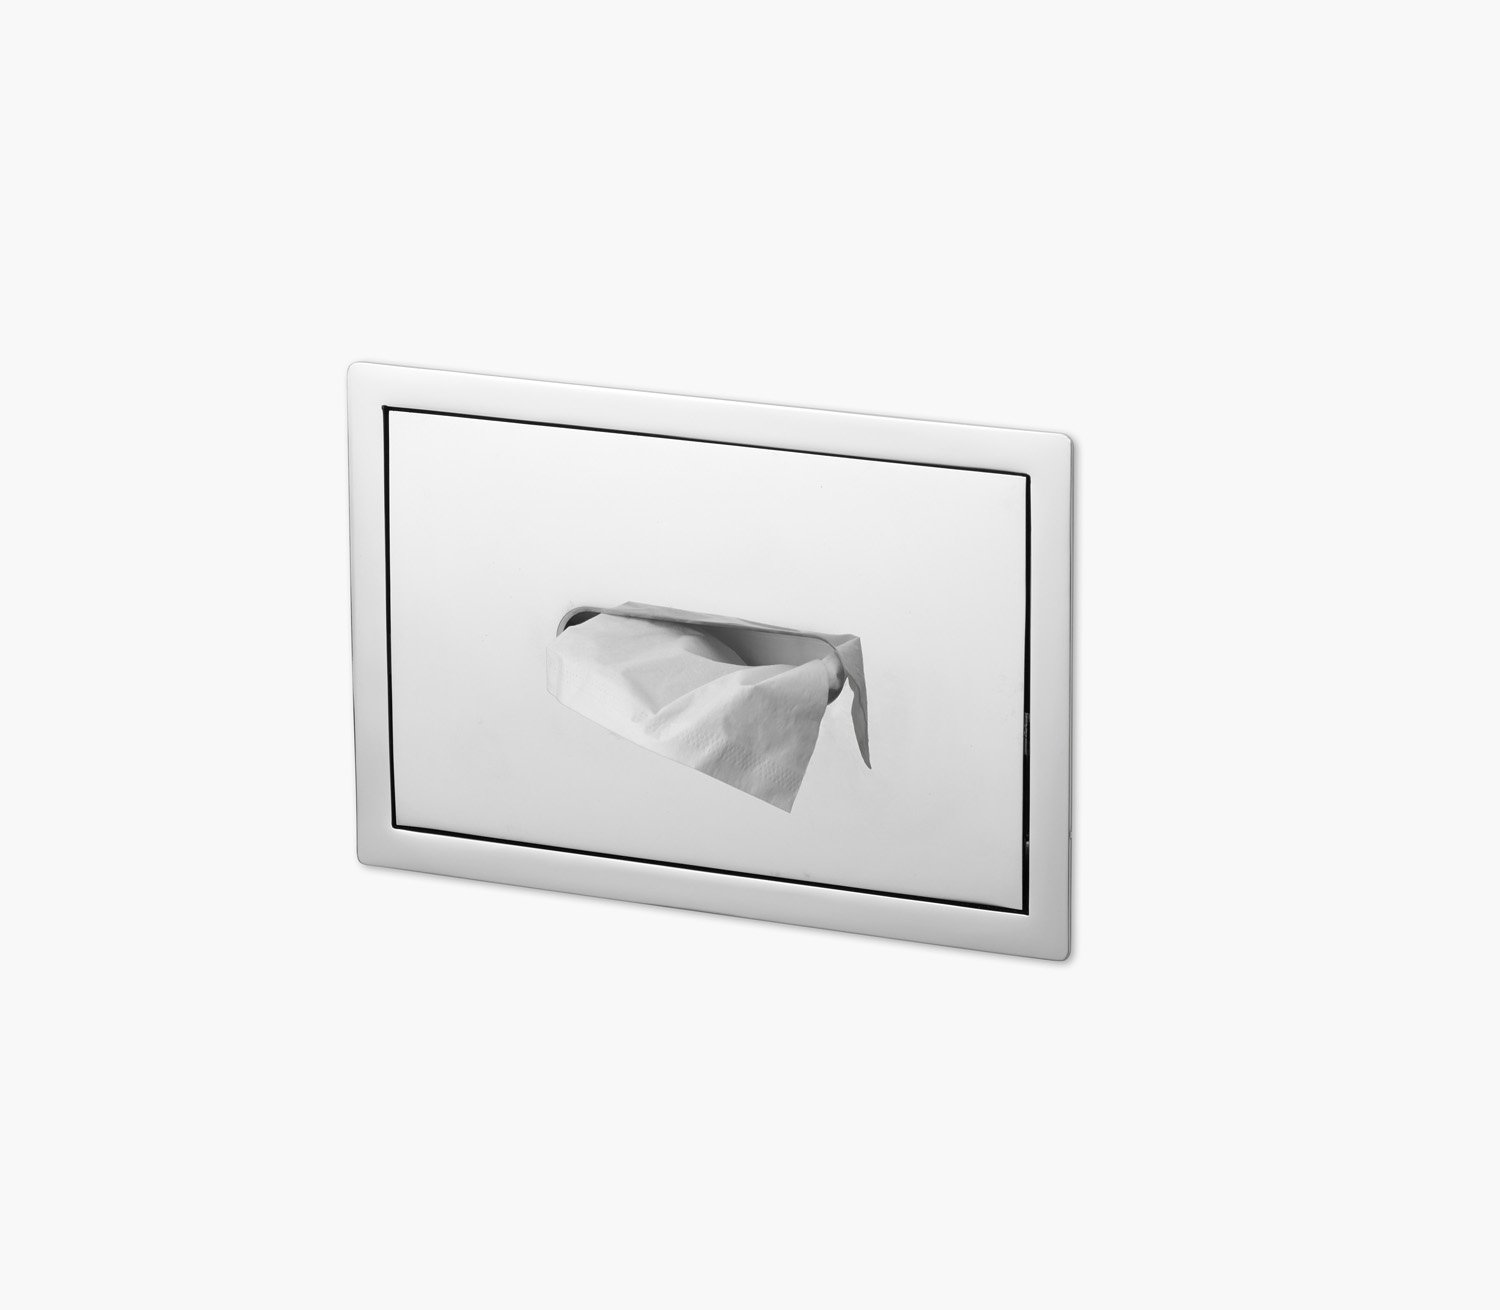 Wall Recessed Tissue Holder Product Image 1